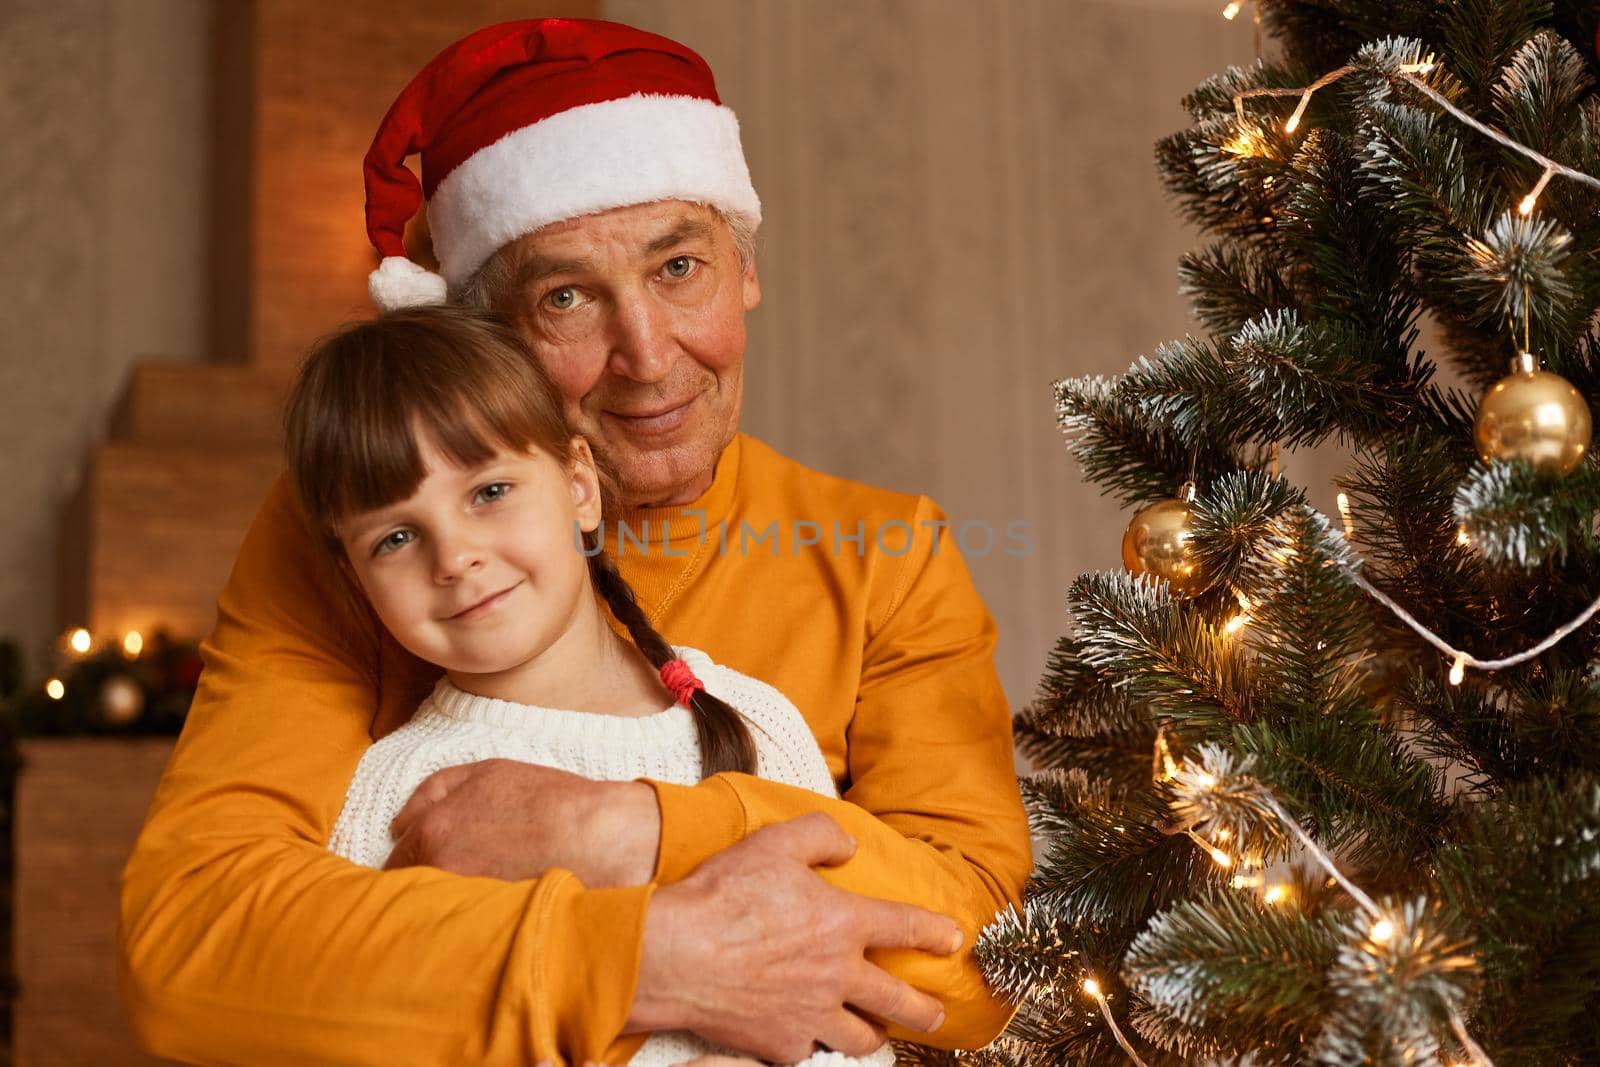 Cute child sitting with grandpa looking at camera with happy expression, grandfather hugging little girl, posing in room with festive new year decoration.